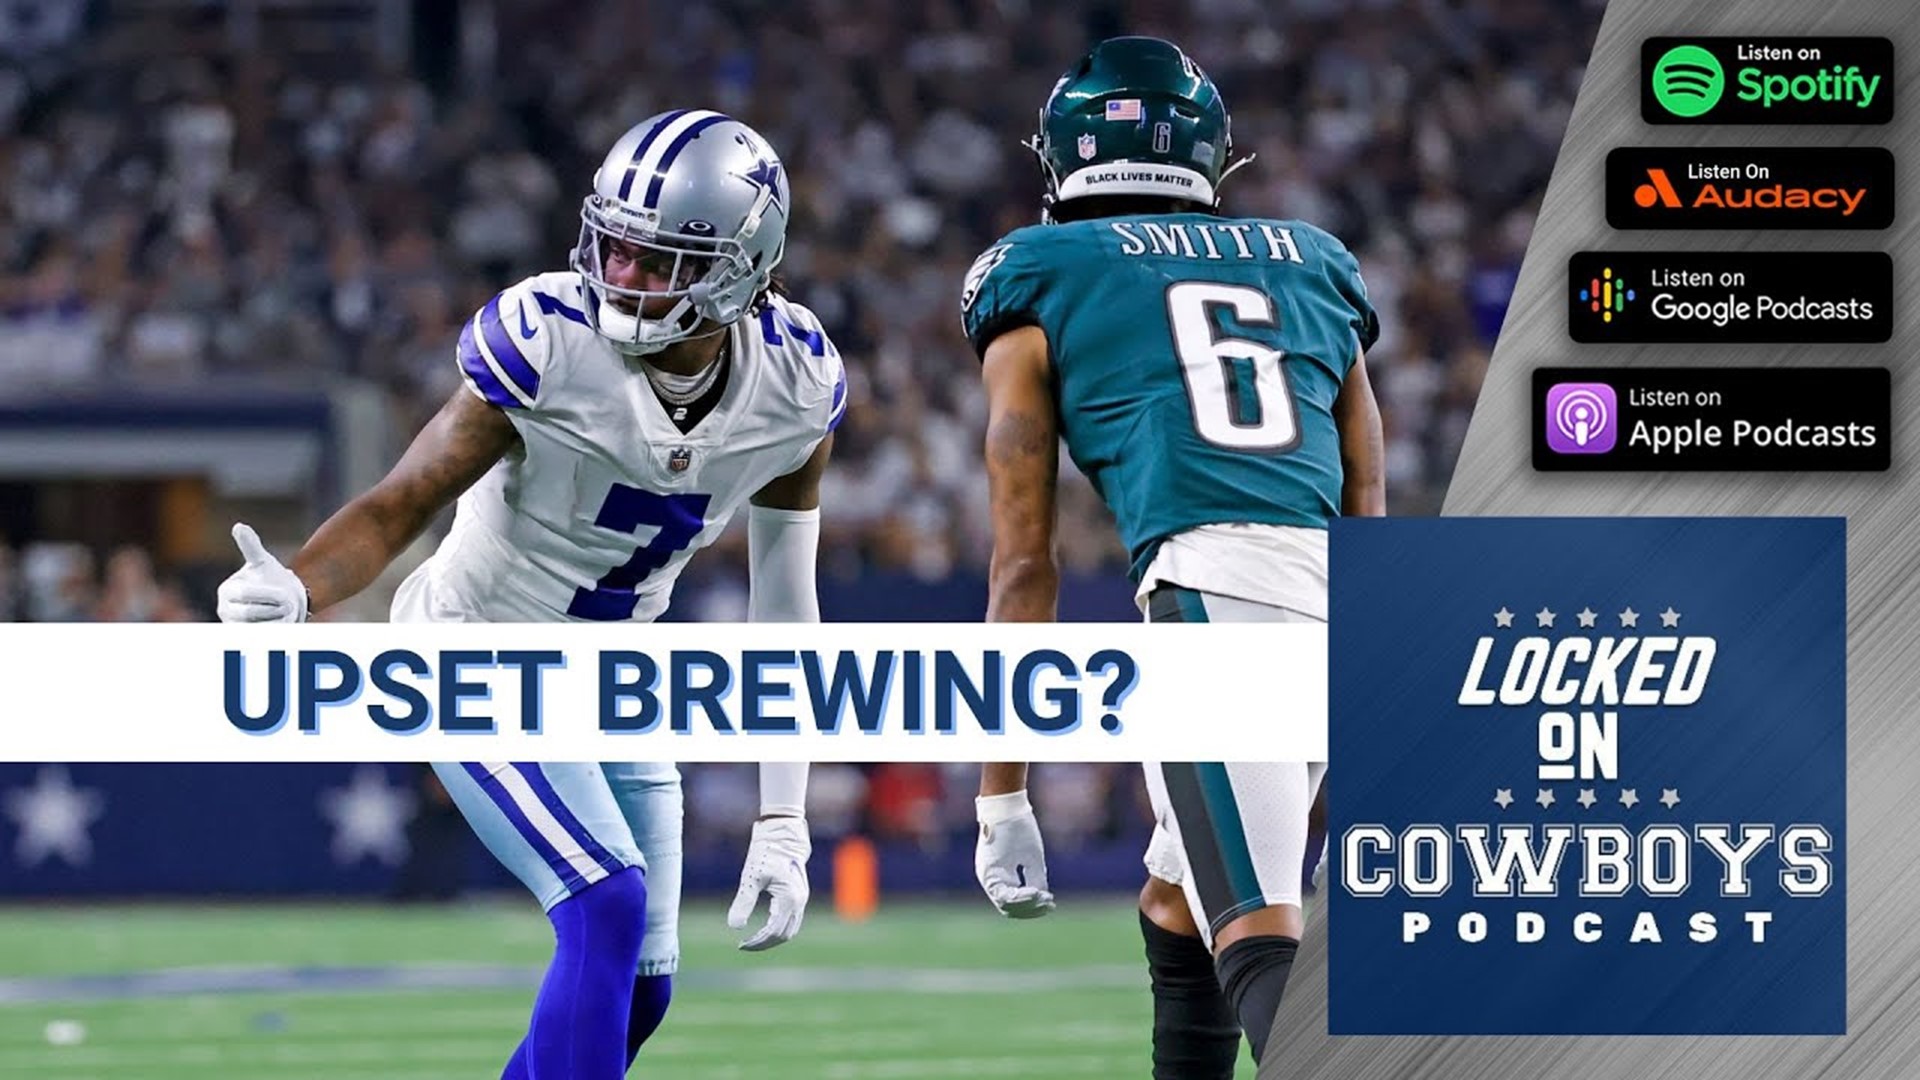 Marcus Mosher and Landon McCool discuss what the Dallas Cowboys need to do to upset the Philadelphia Eagles on Sunday Night Football.